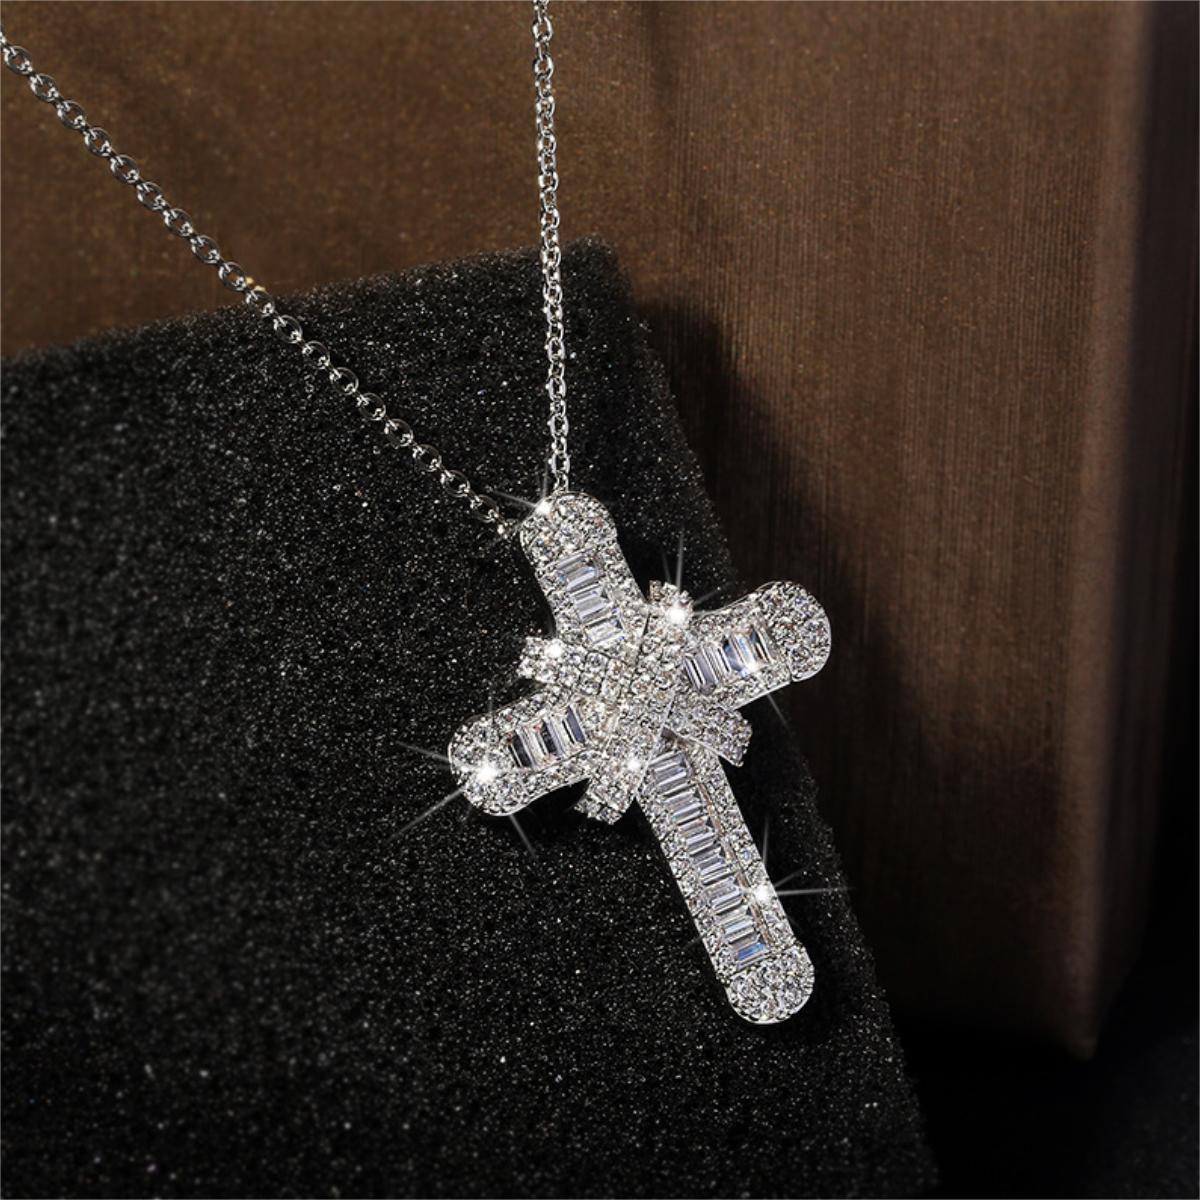 Crystal Cross Silver Necklace